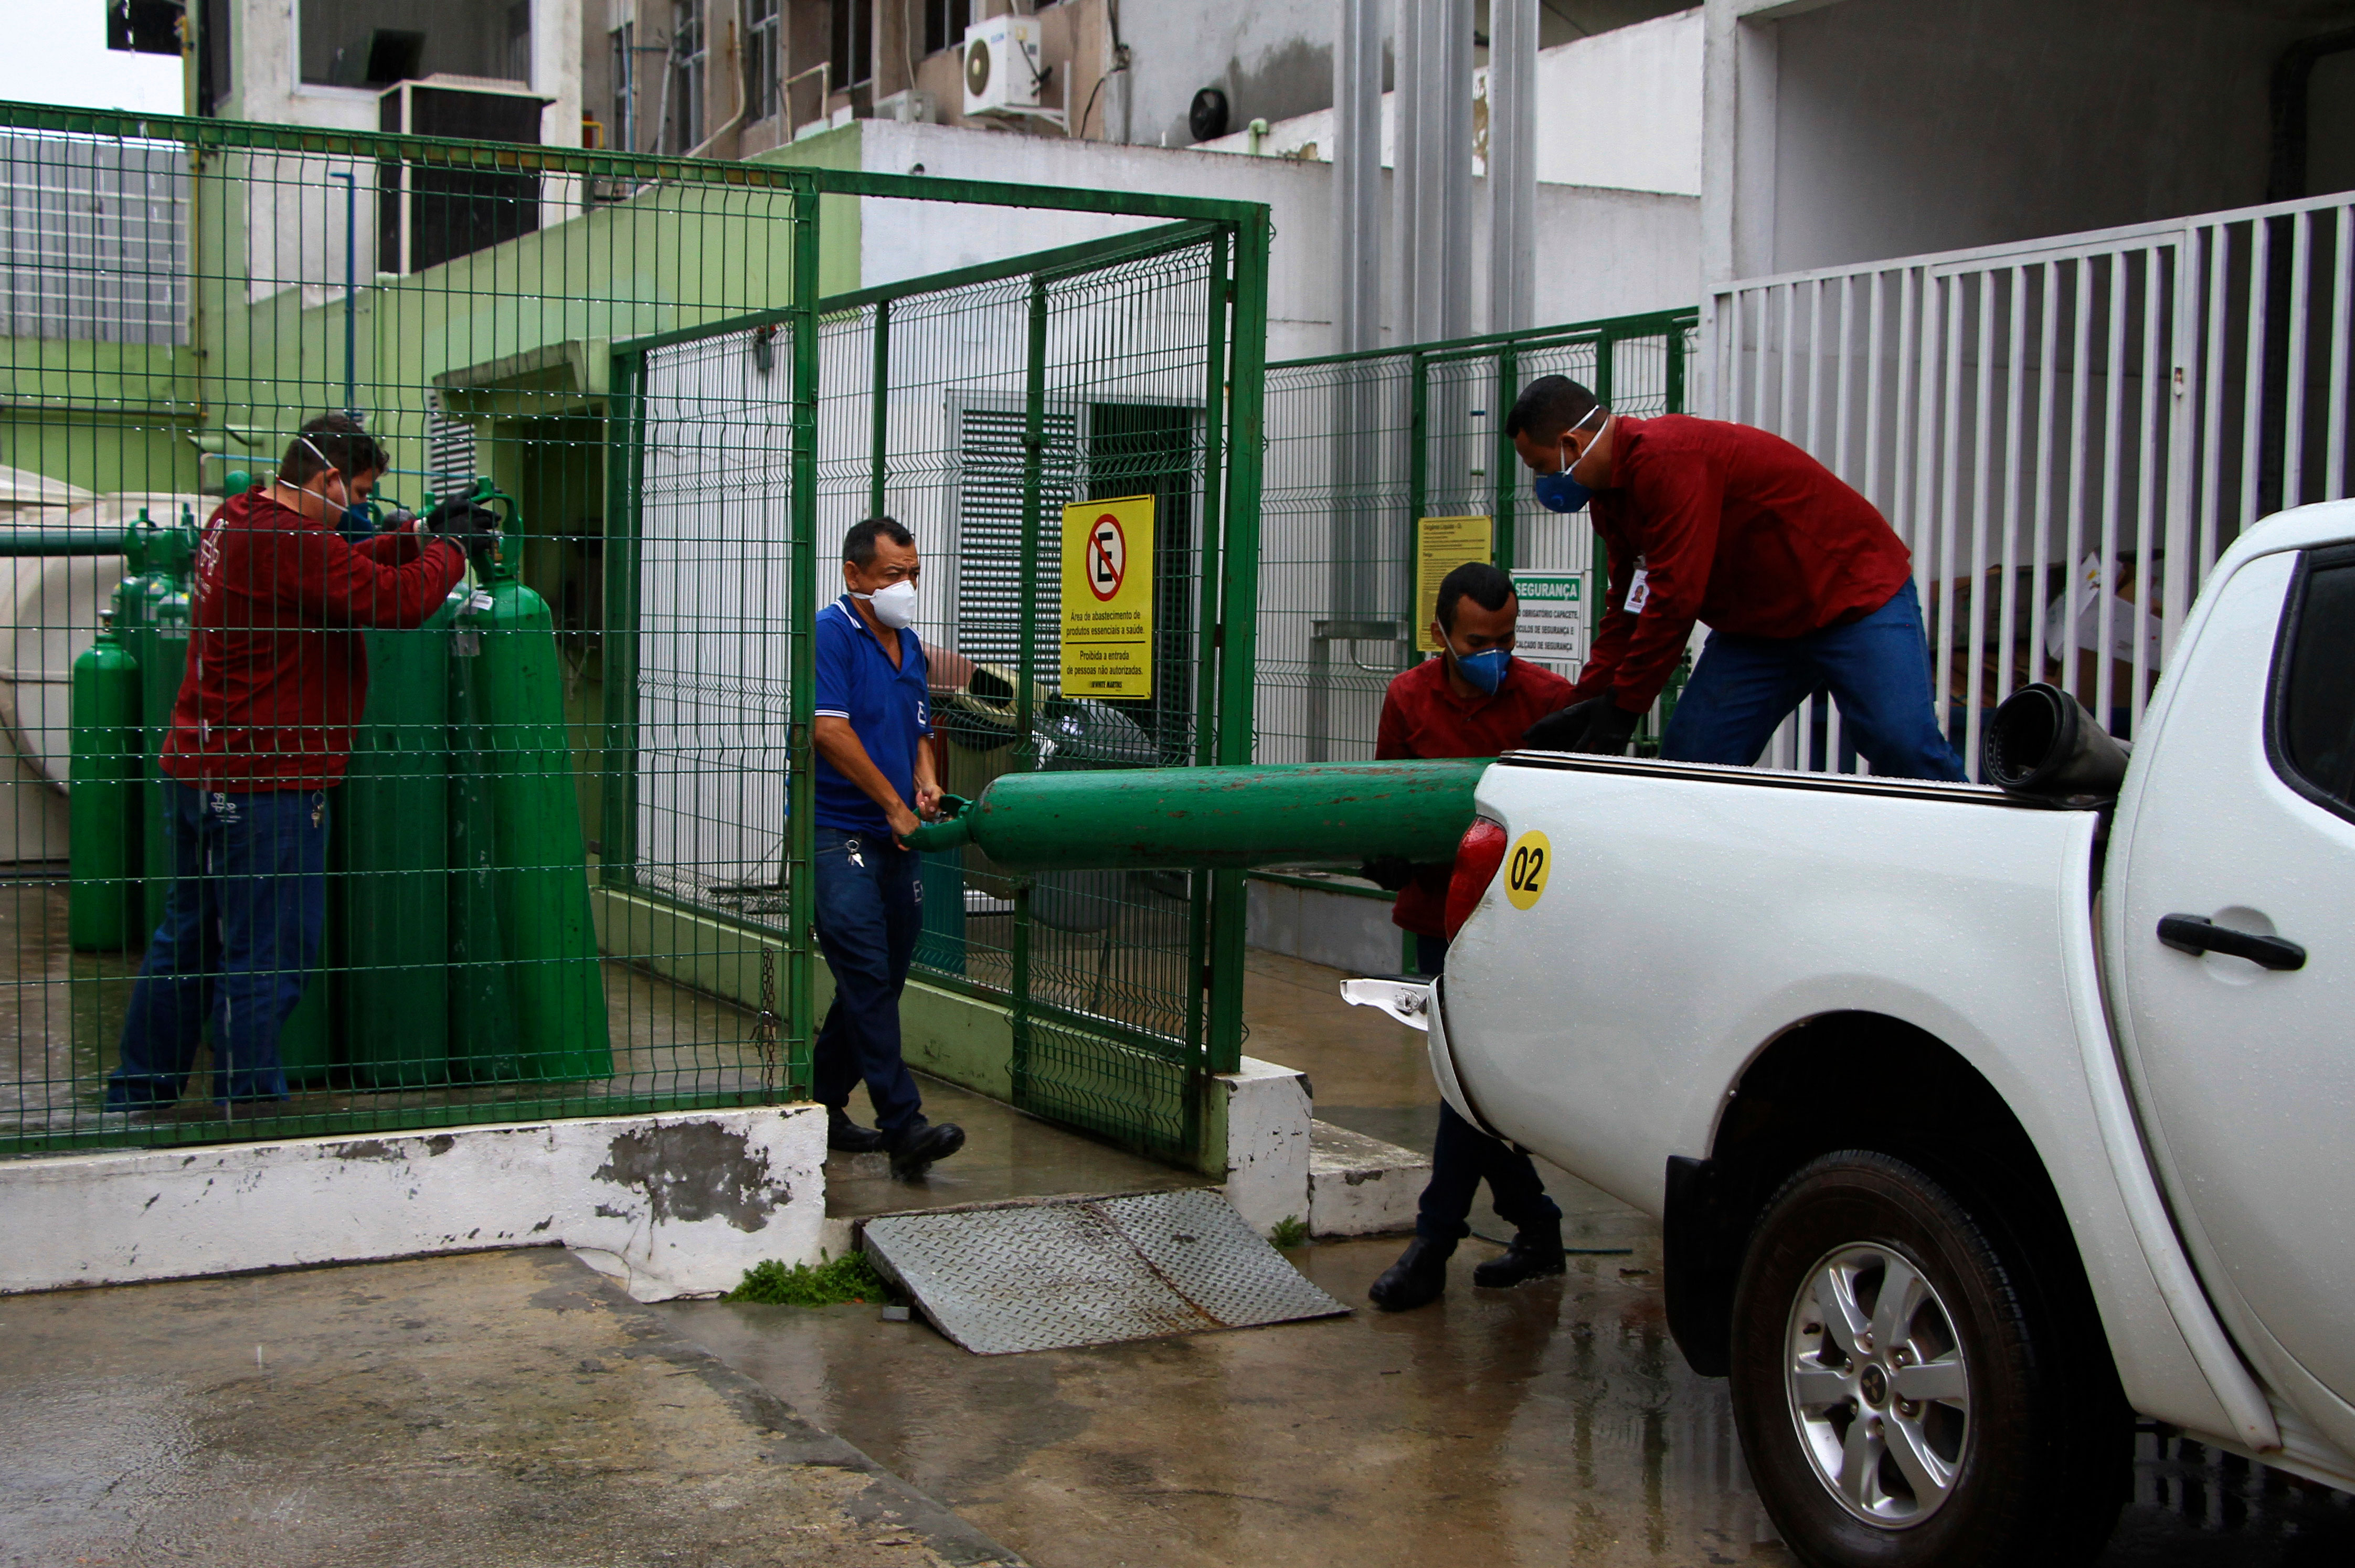 Workers carry empty oxygen tanks at Getulio Vargas Hospital in Manaus, Brazil, on January 14.